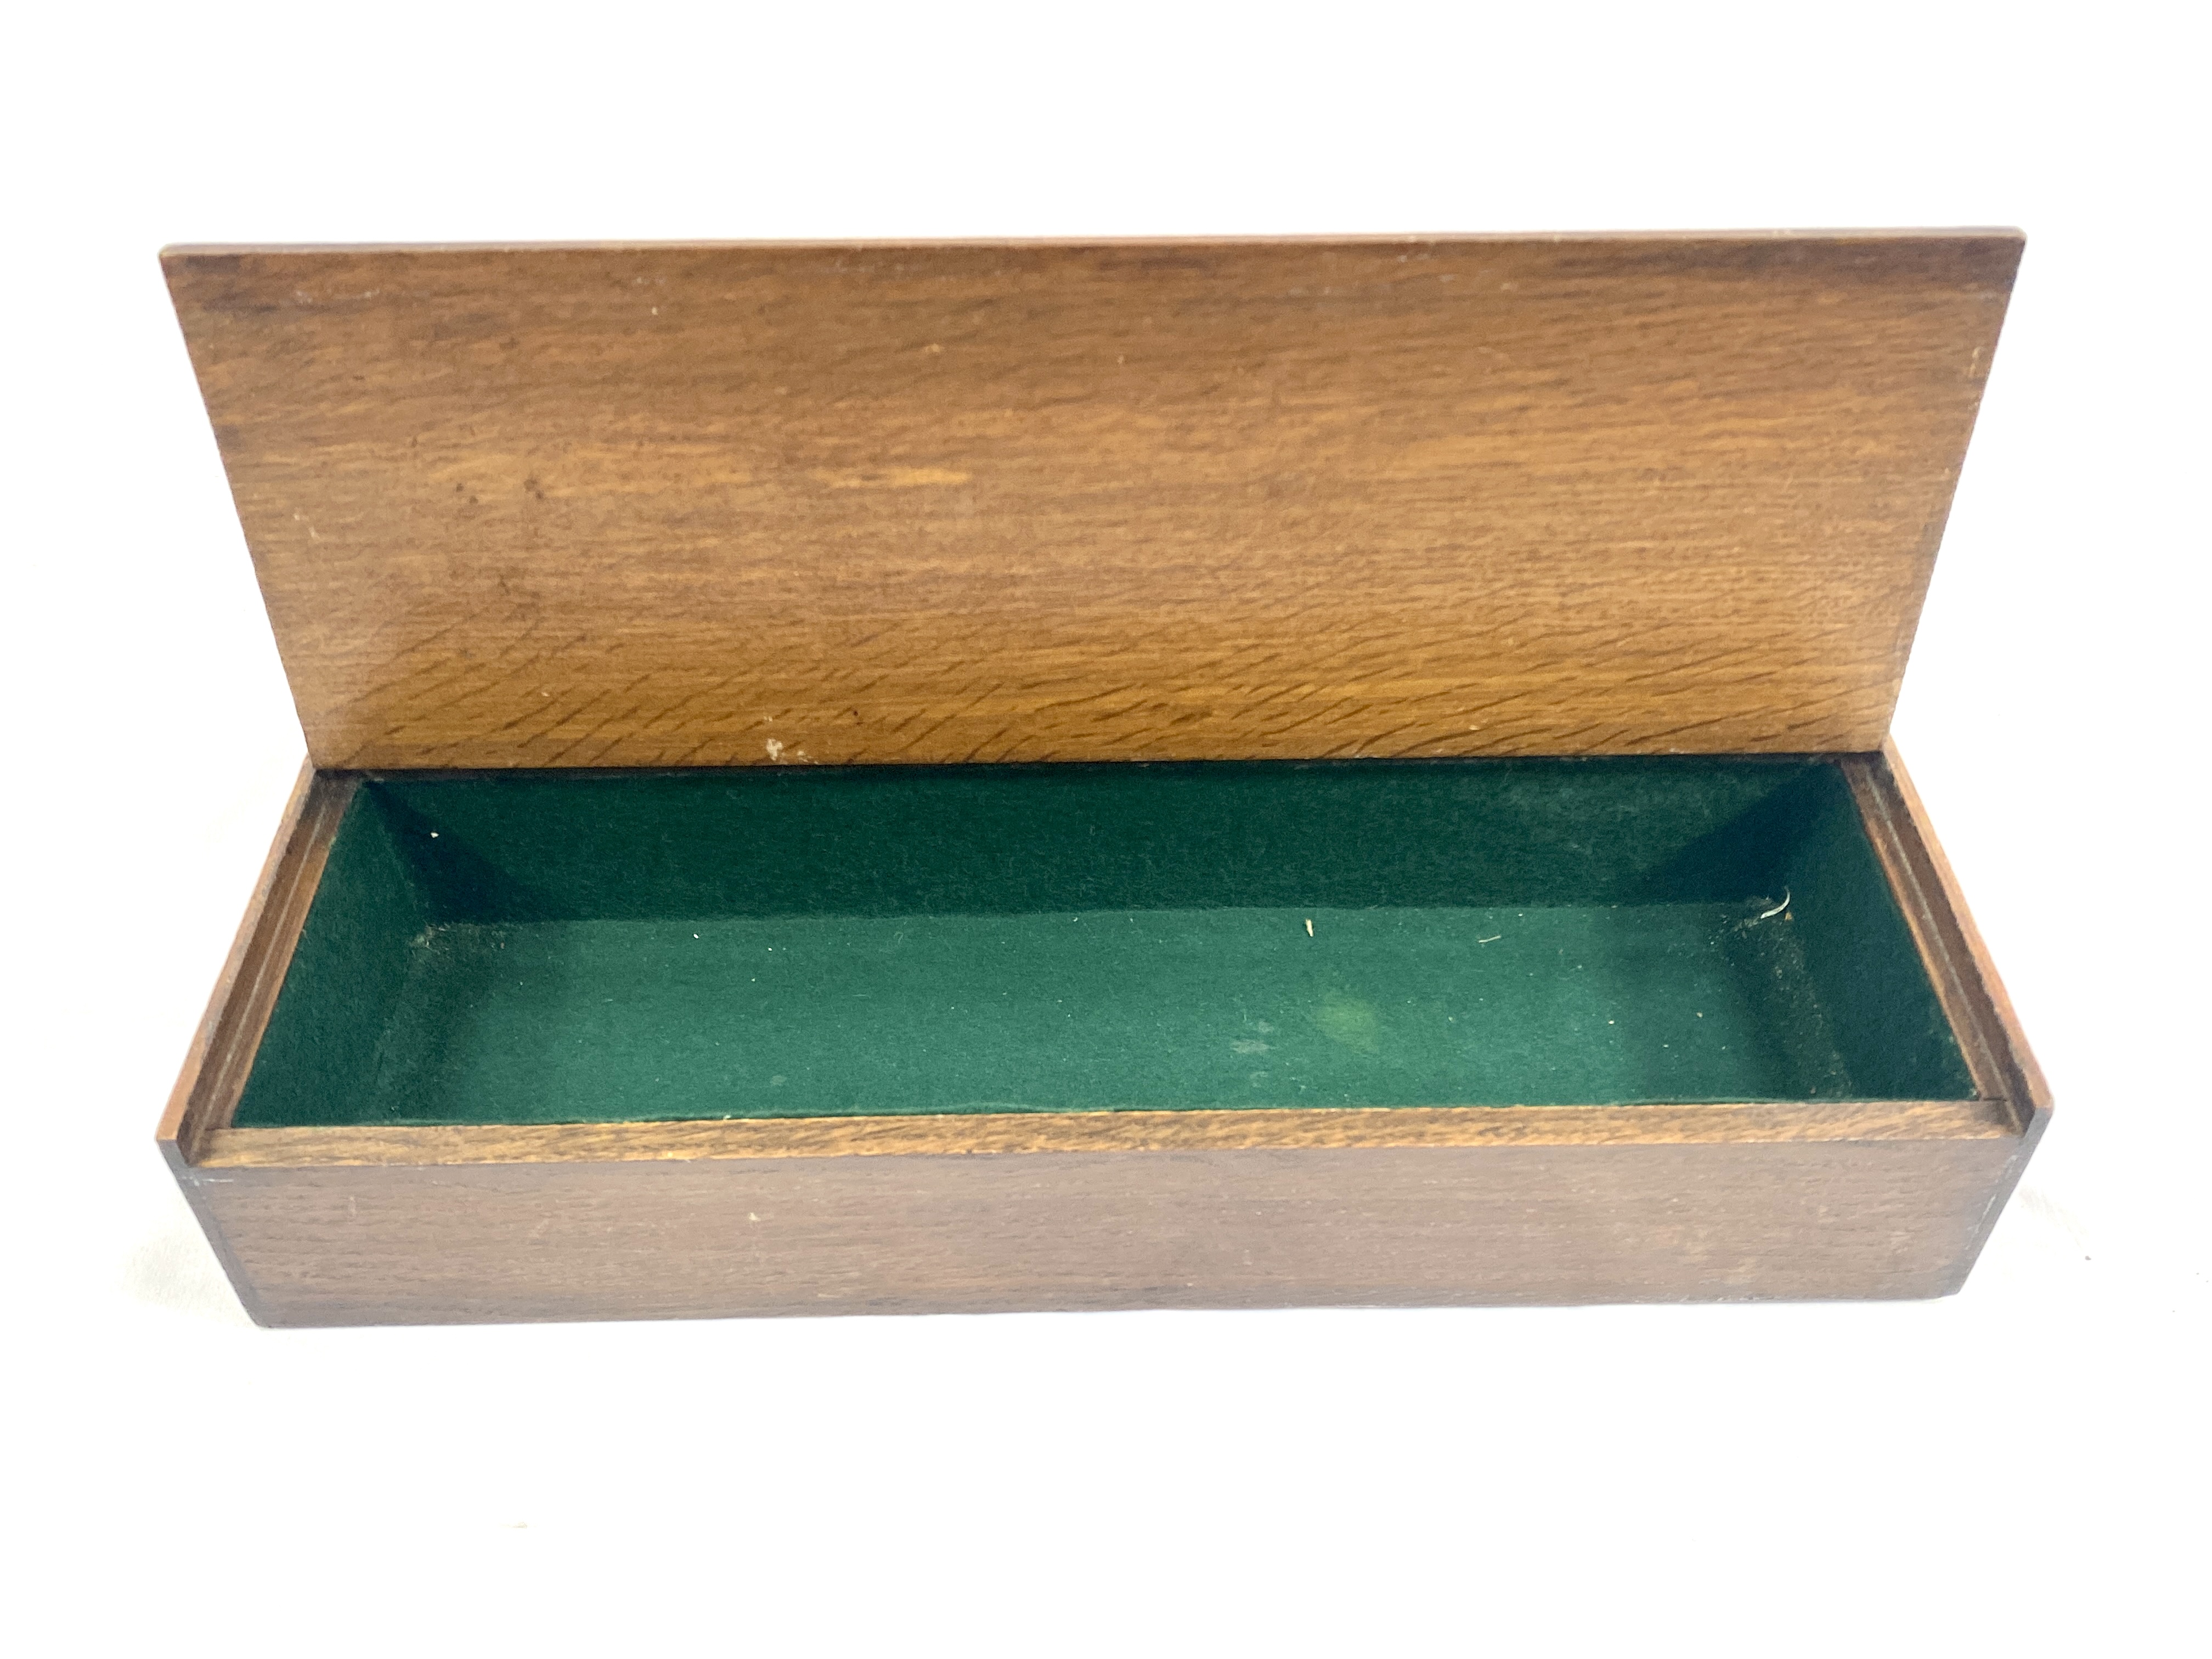 Oak cutlery box with lifting lid - Image 2 of 4